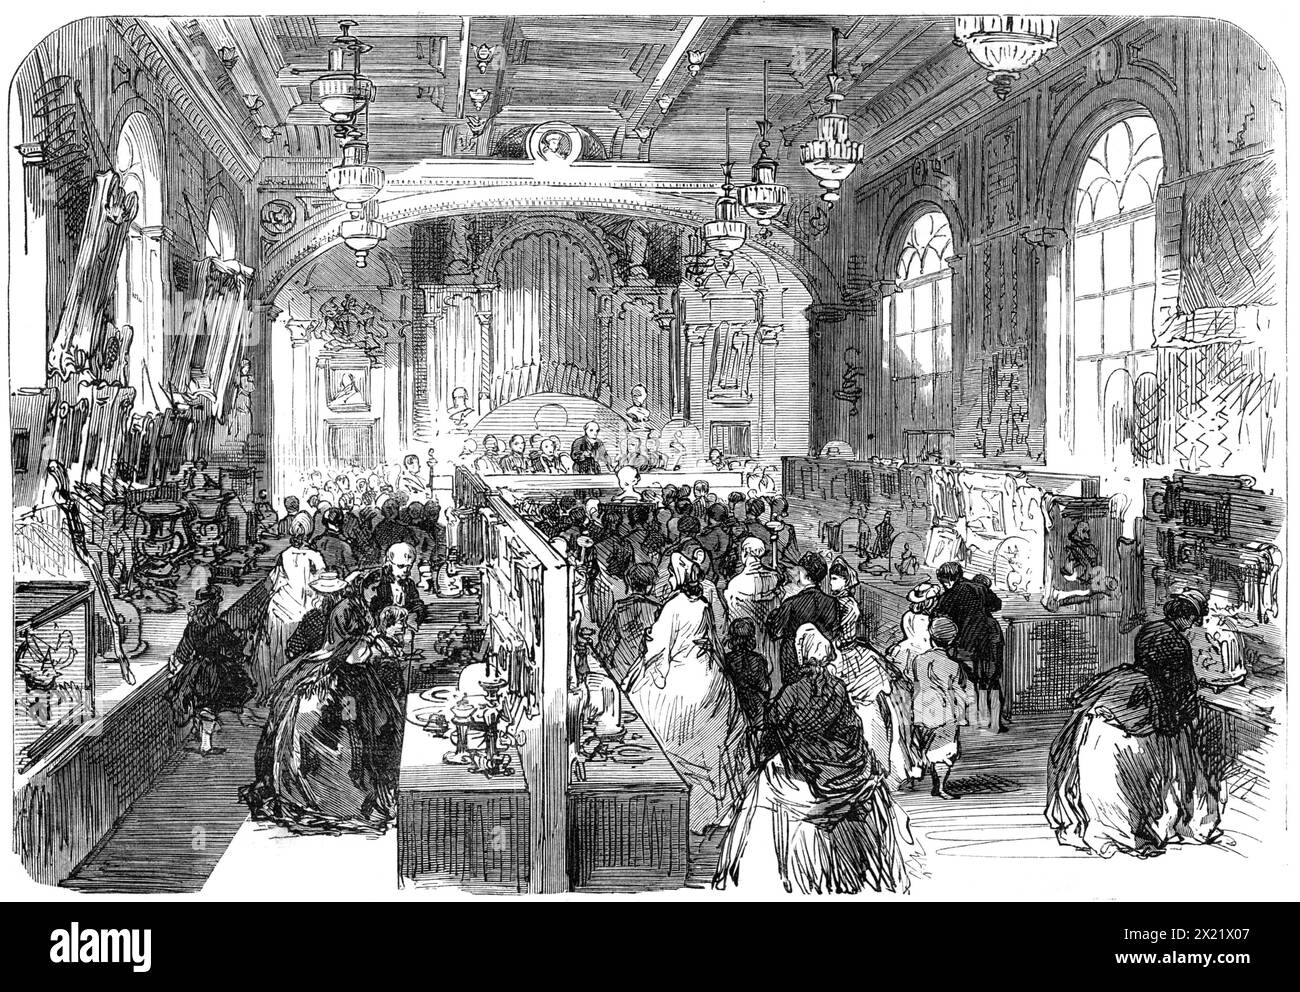 Opening of the Reading Industrial Exhibition, 1865. 'This exhibition...is two-fold, being partly an industrial exhibition, made up of specimens of the skill, the taste, and the ingenuity of the working-class people of that town and district; partly a fine-arts loan exhibition, to which many of the nobility and gentry have sent a great variety of precious things...When we mention that out of the 1680 articles catalogued more than 900 come from Windsor Castle and the various seats of the nobility and gentry in the county, some idea may be formed of the richness of the exhibition...The Industrial Stock Photo